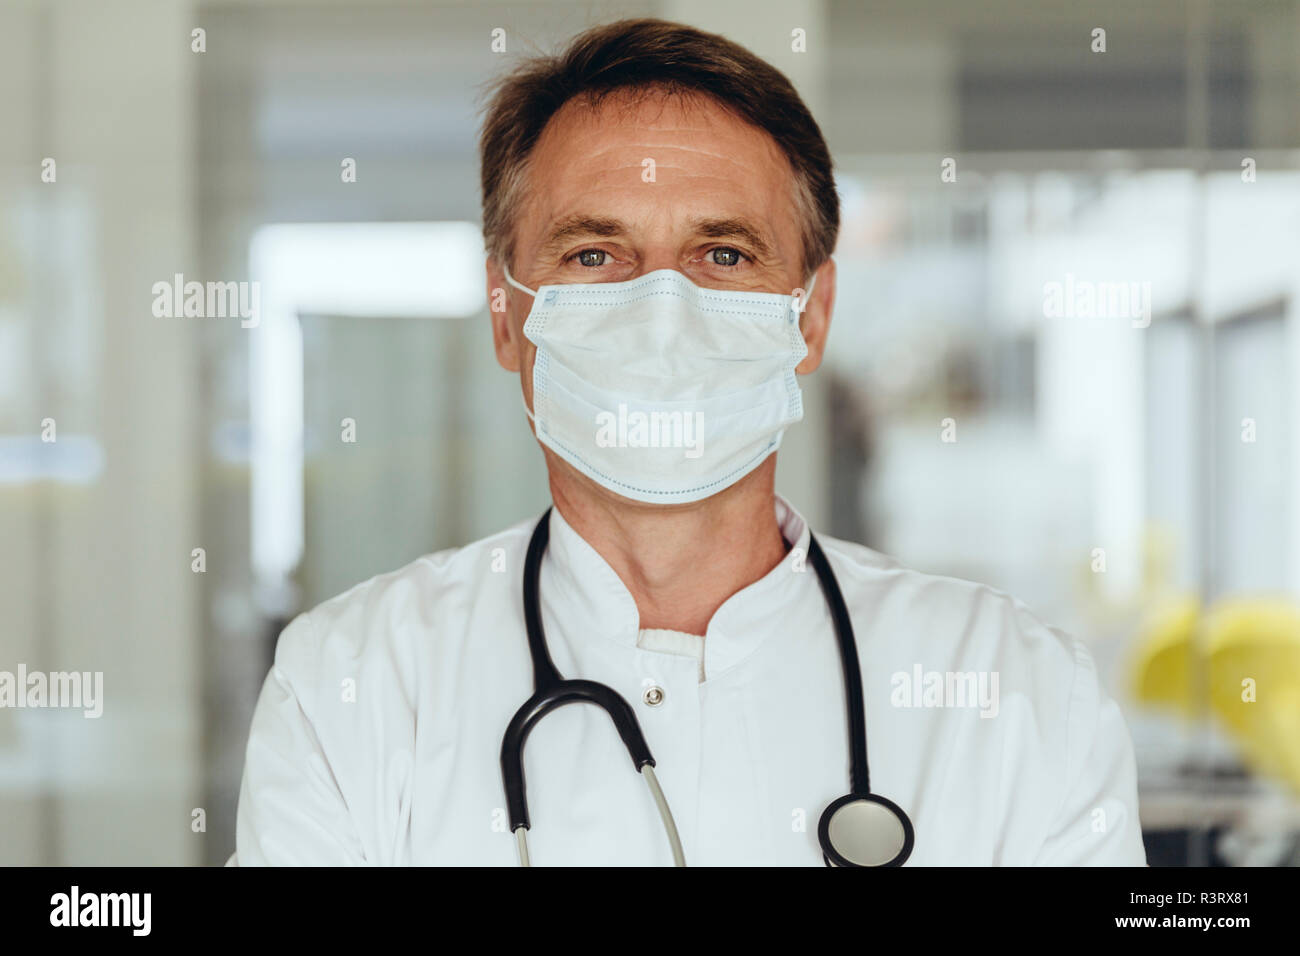 Portrait of a doctor, wearing surgical mask Stock Photo